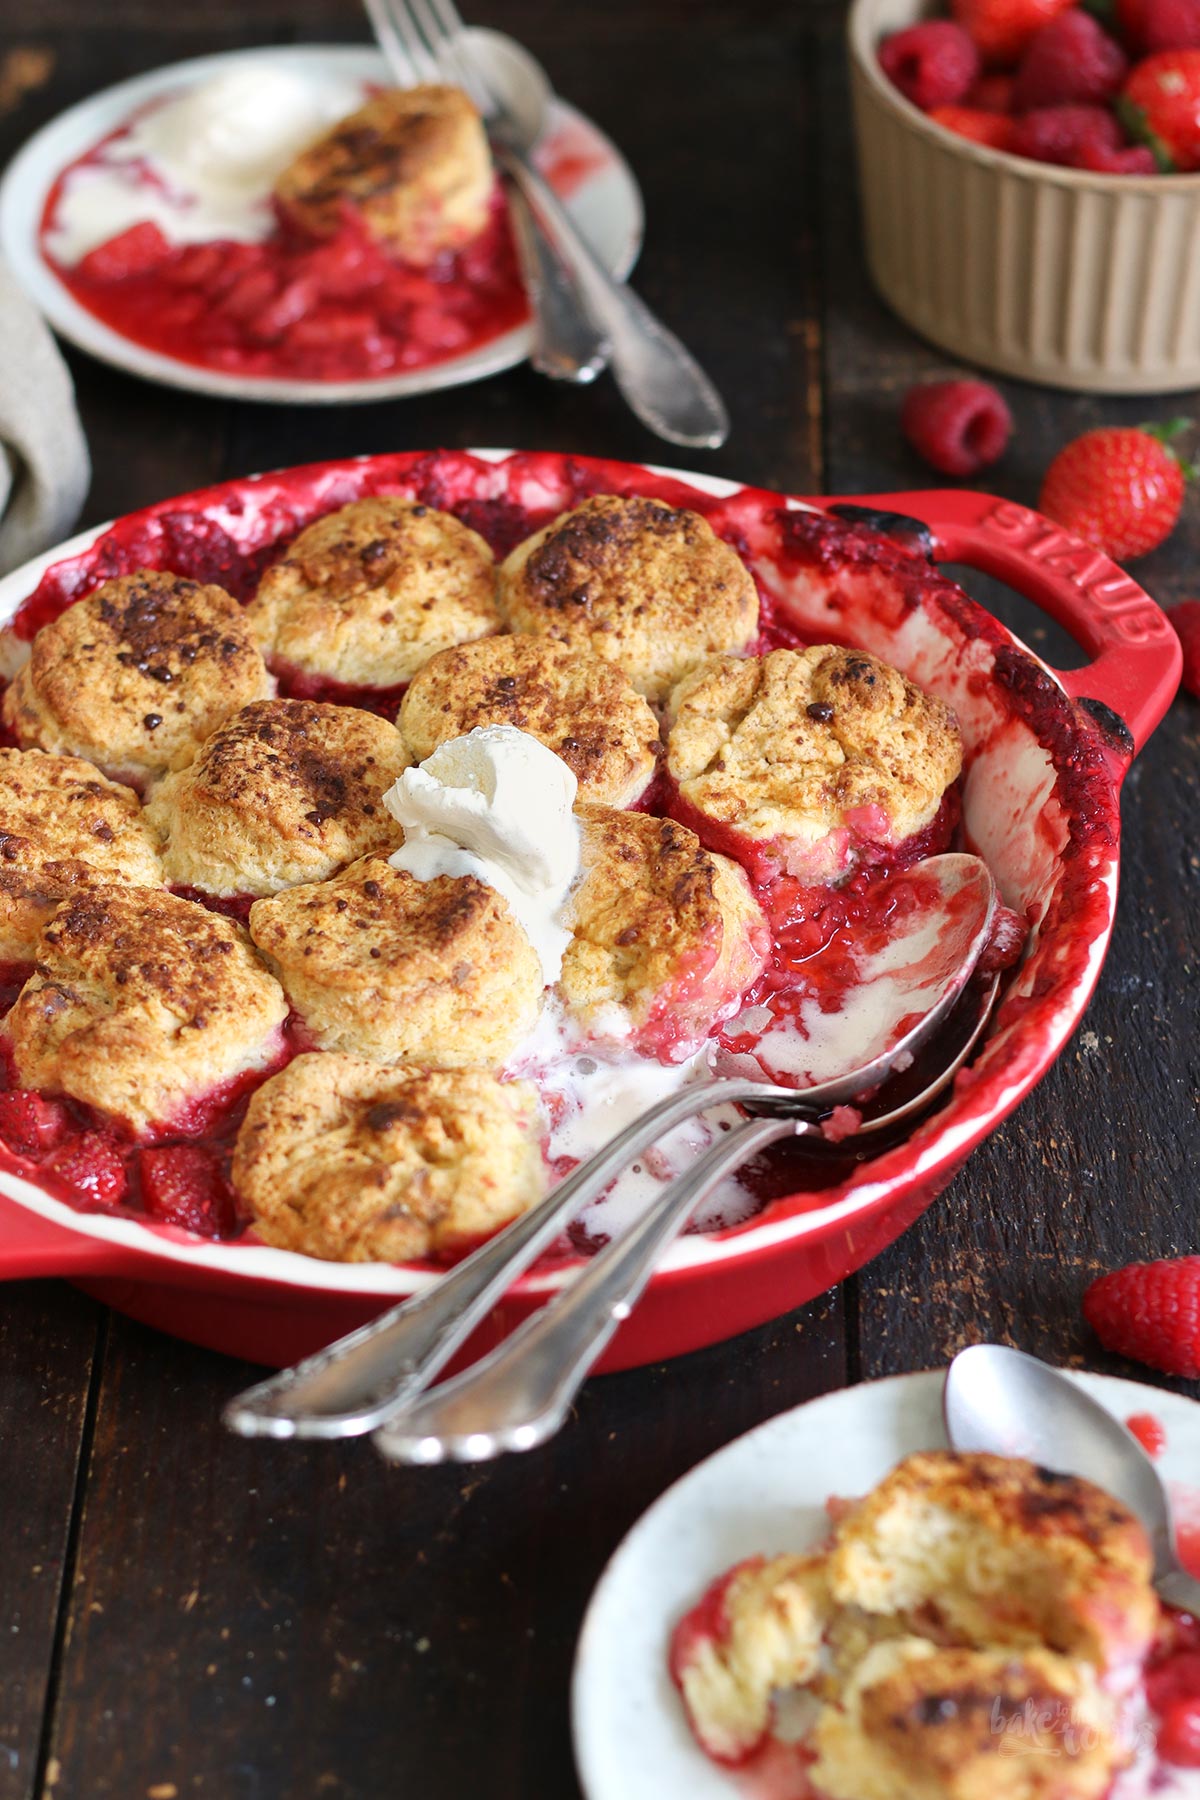 Strawberry & Raspberry Cobbler | Bake to the roots